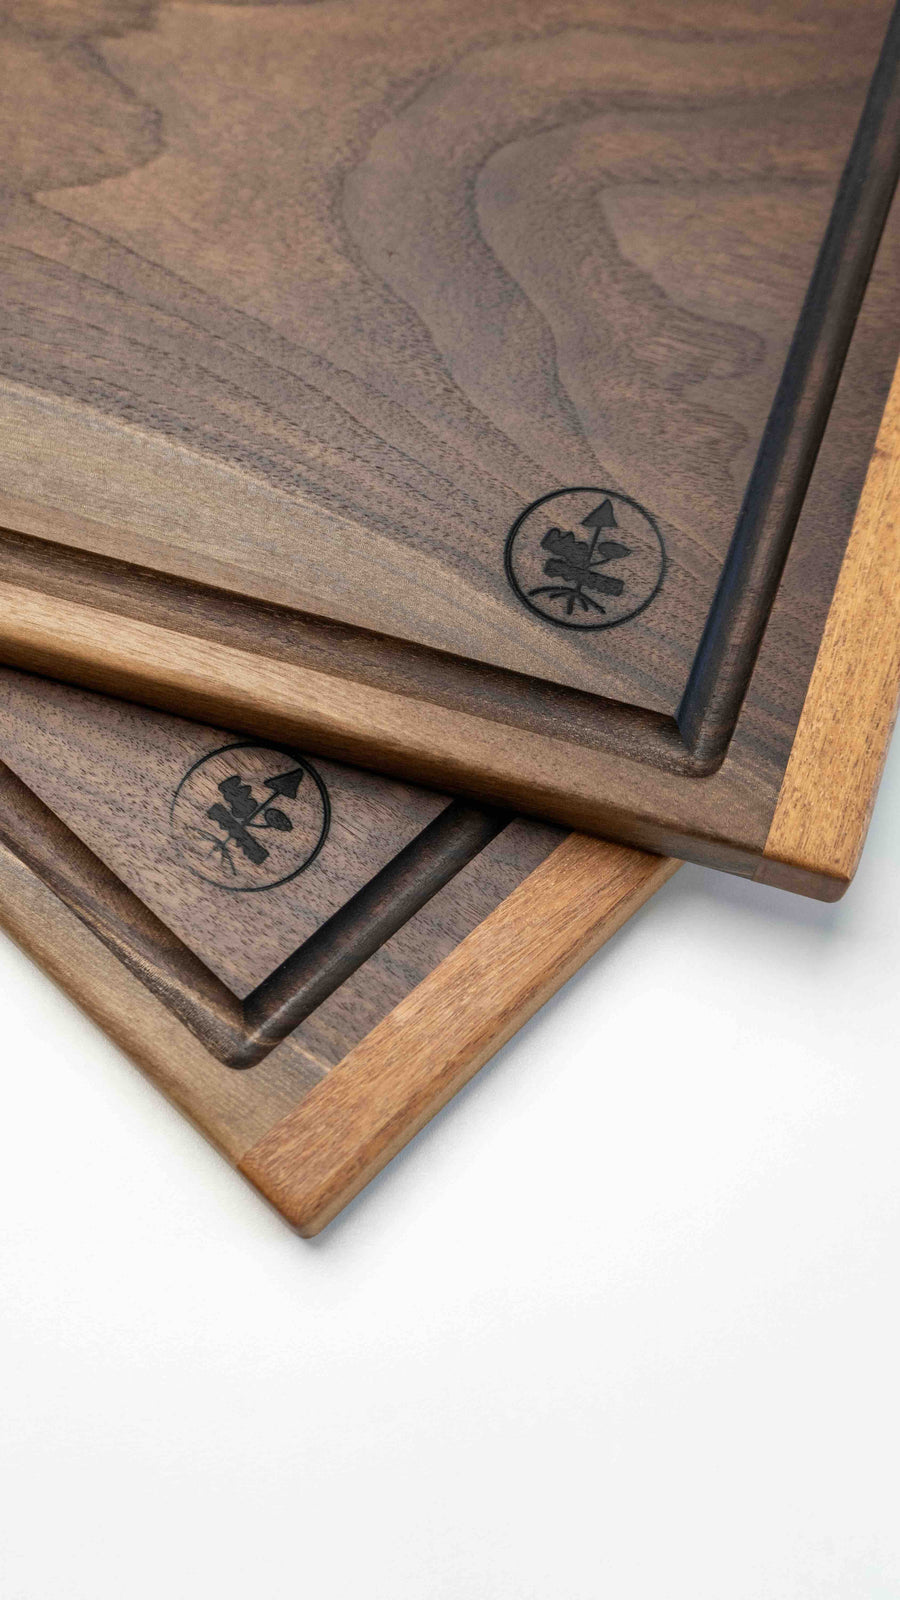 Handcrafted by Slovenian woodworker J. Gros, these cutting boards are made from American walnut, known for strength and durability. This extra large cutting board offers plenty of space for comfortable and lengthy chopping – either at home or in a professional kitchen. It also makes a great serving board.